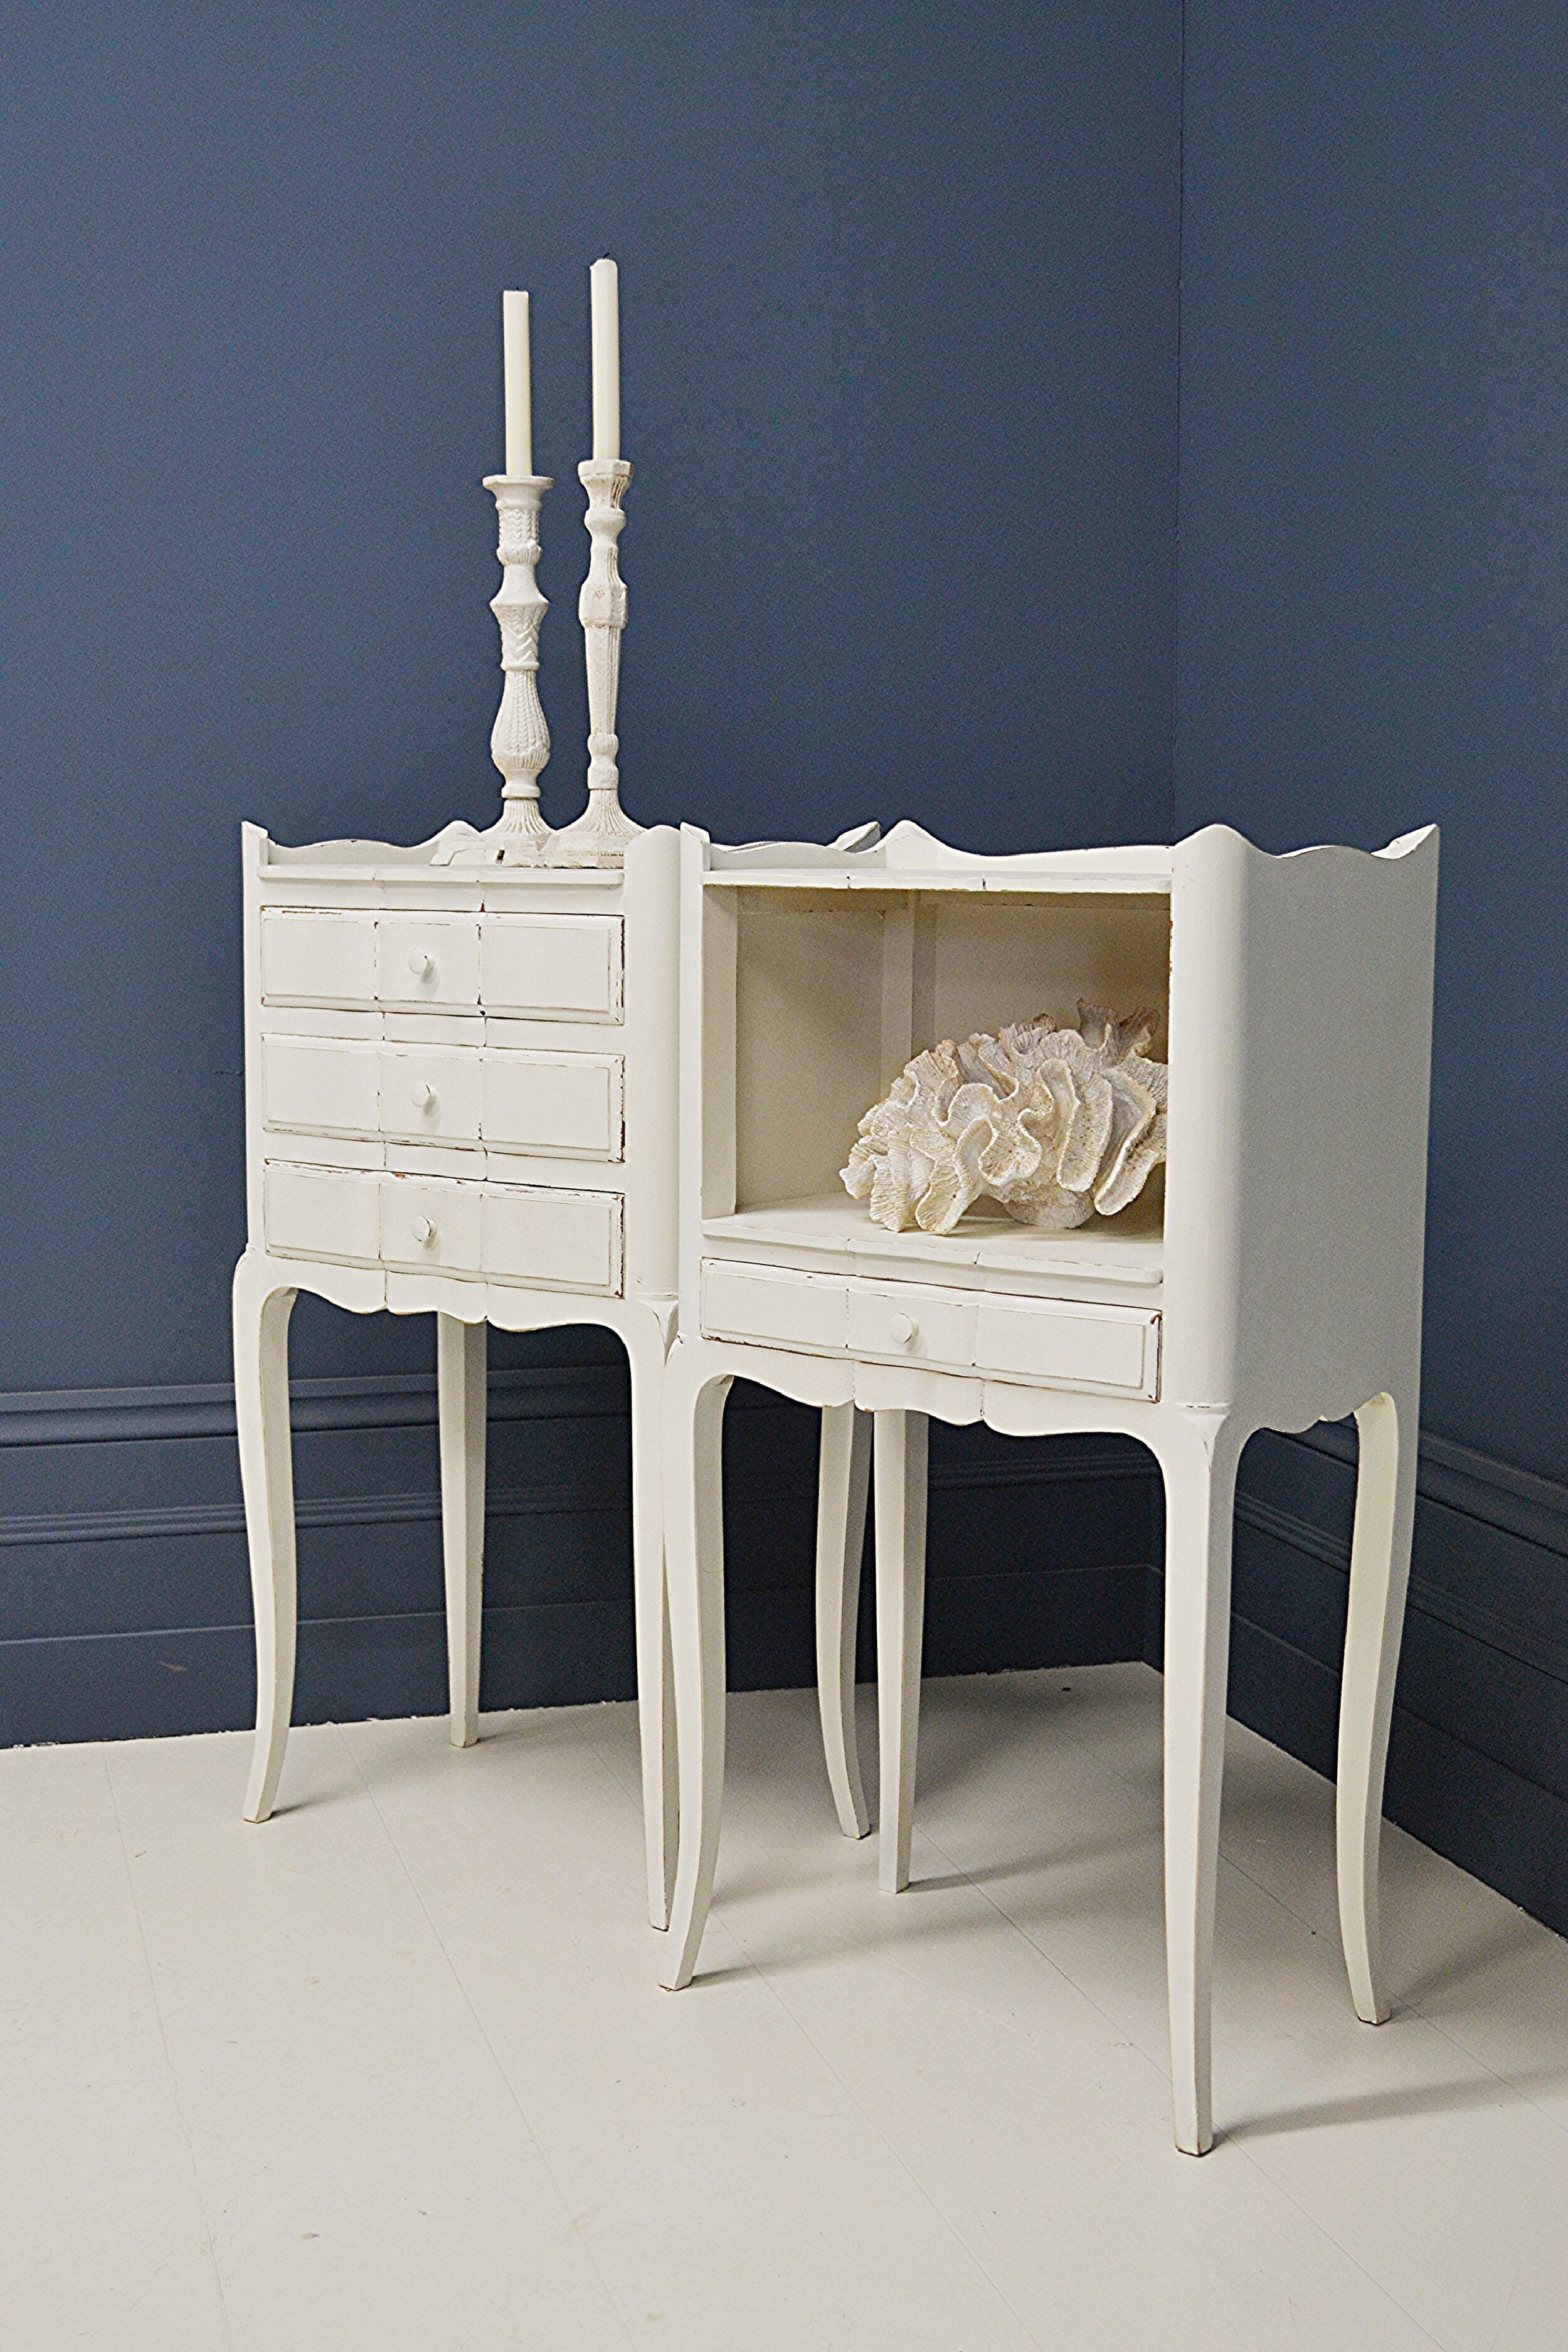 Pair Of Shabby Chic Vintage French Bedside Tables White The Treasure Trove In Sussex Shabby Chic Furniture Vintage Furniture